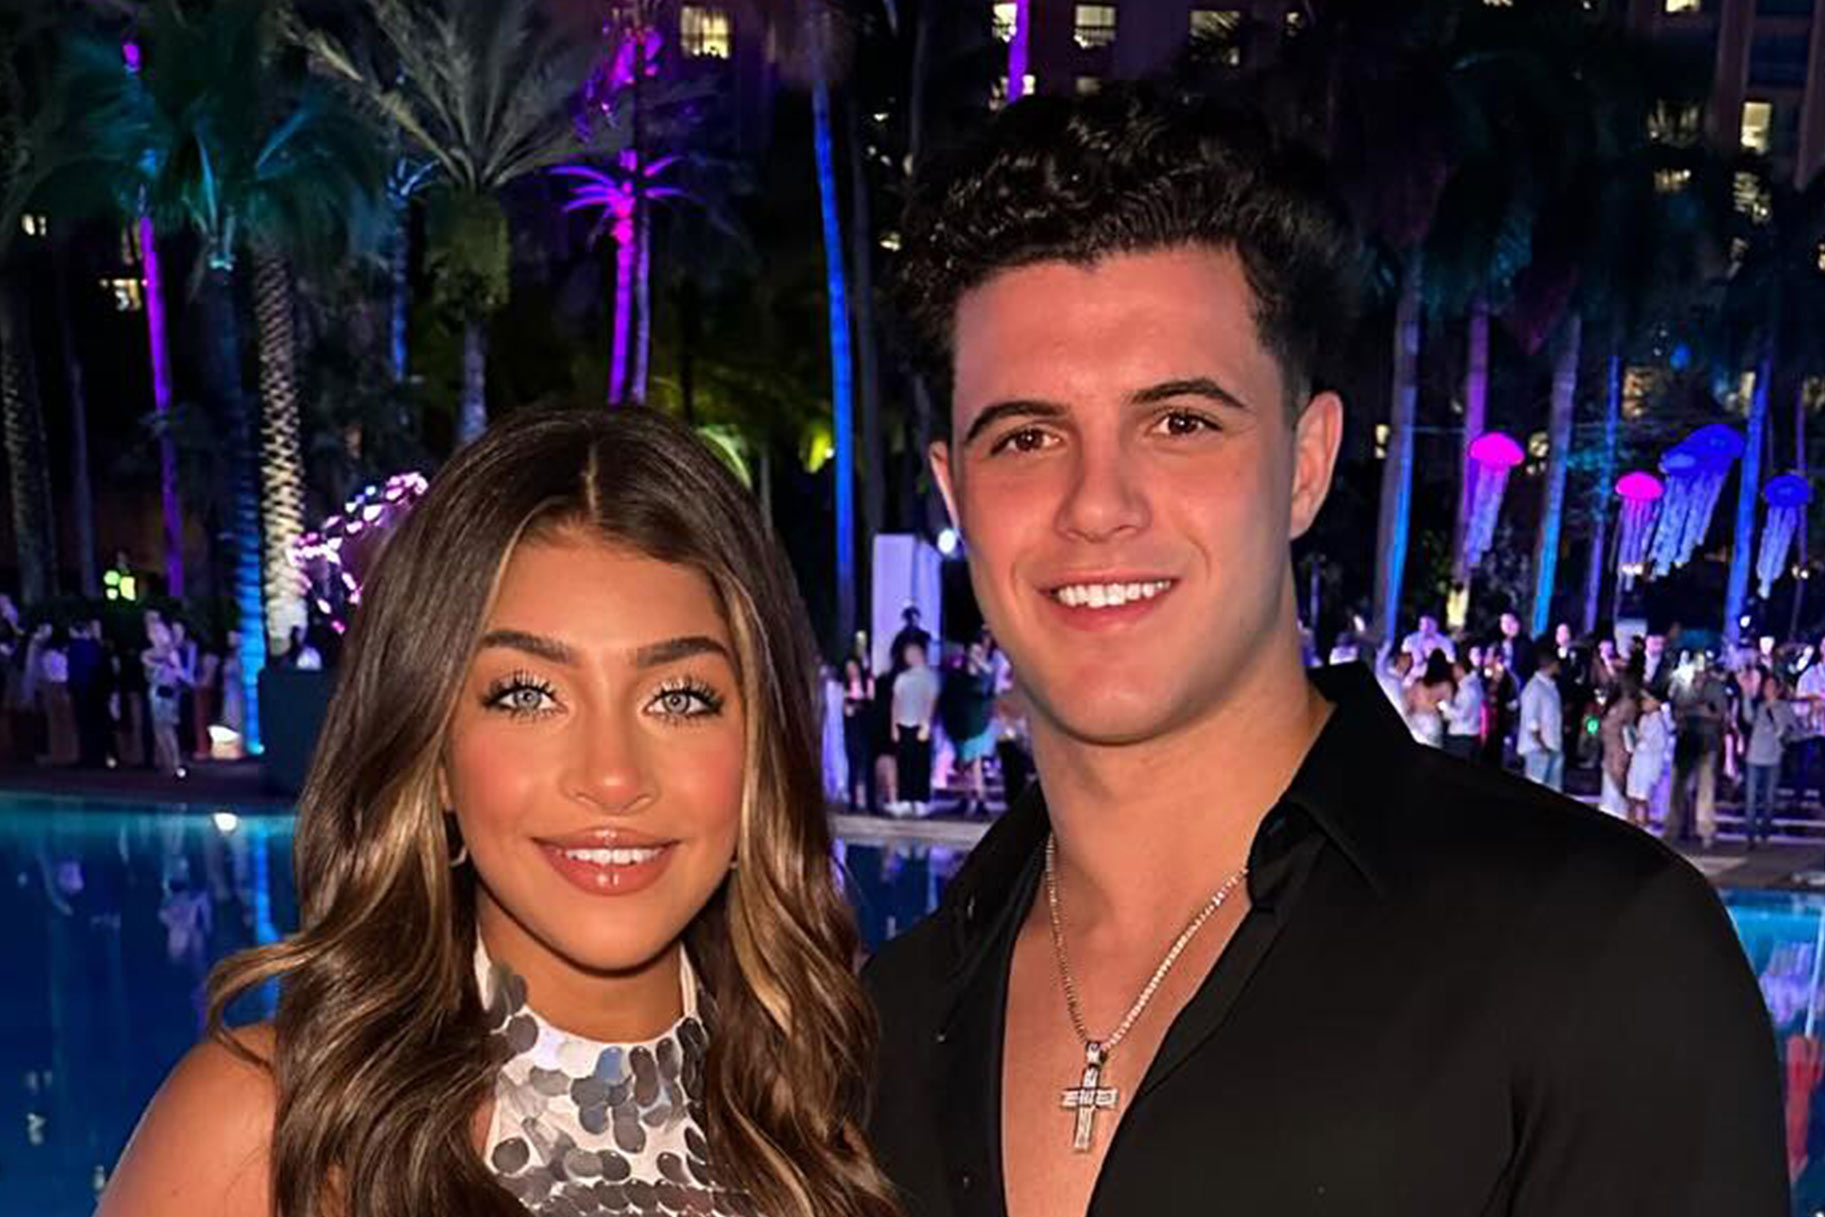 Gia Giudice and Christian Carmichael smiling in front of a pool.